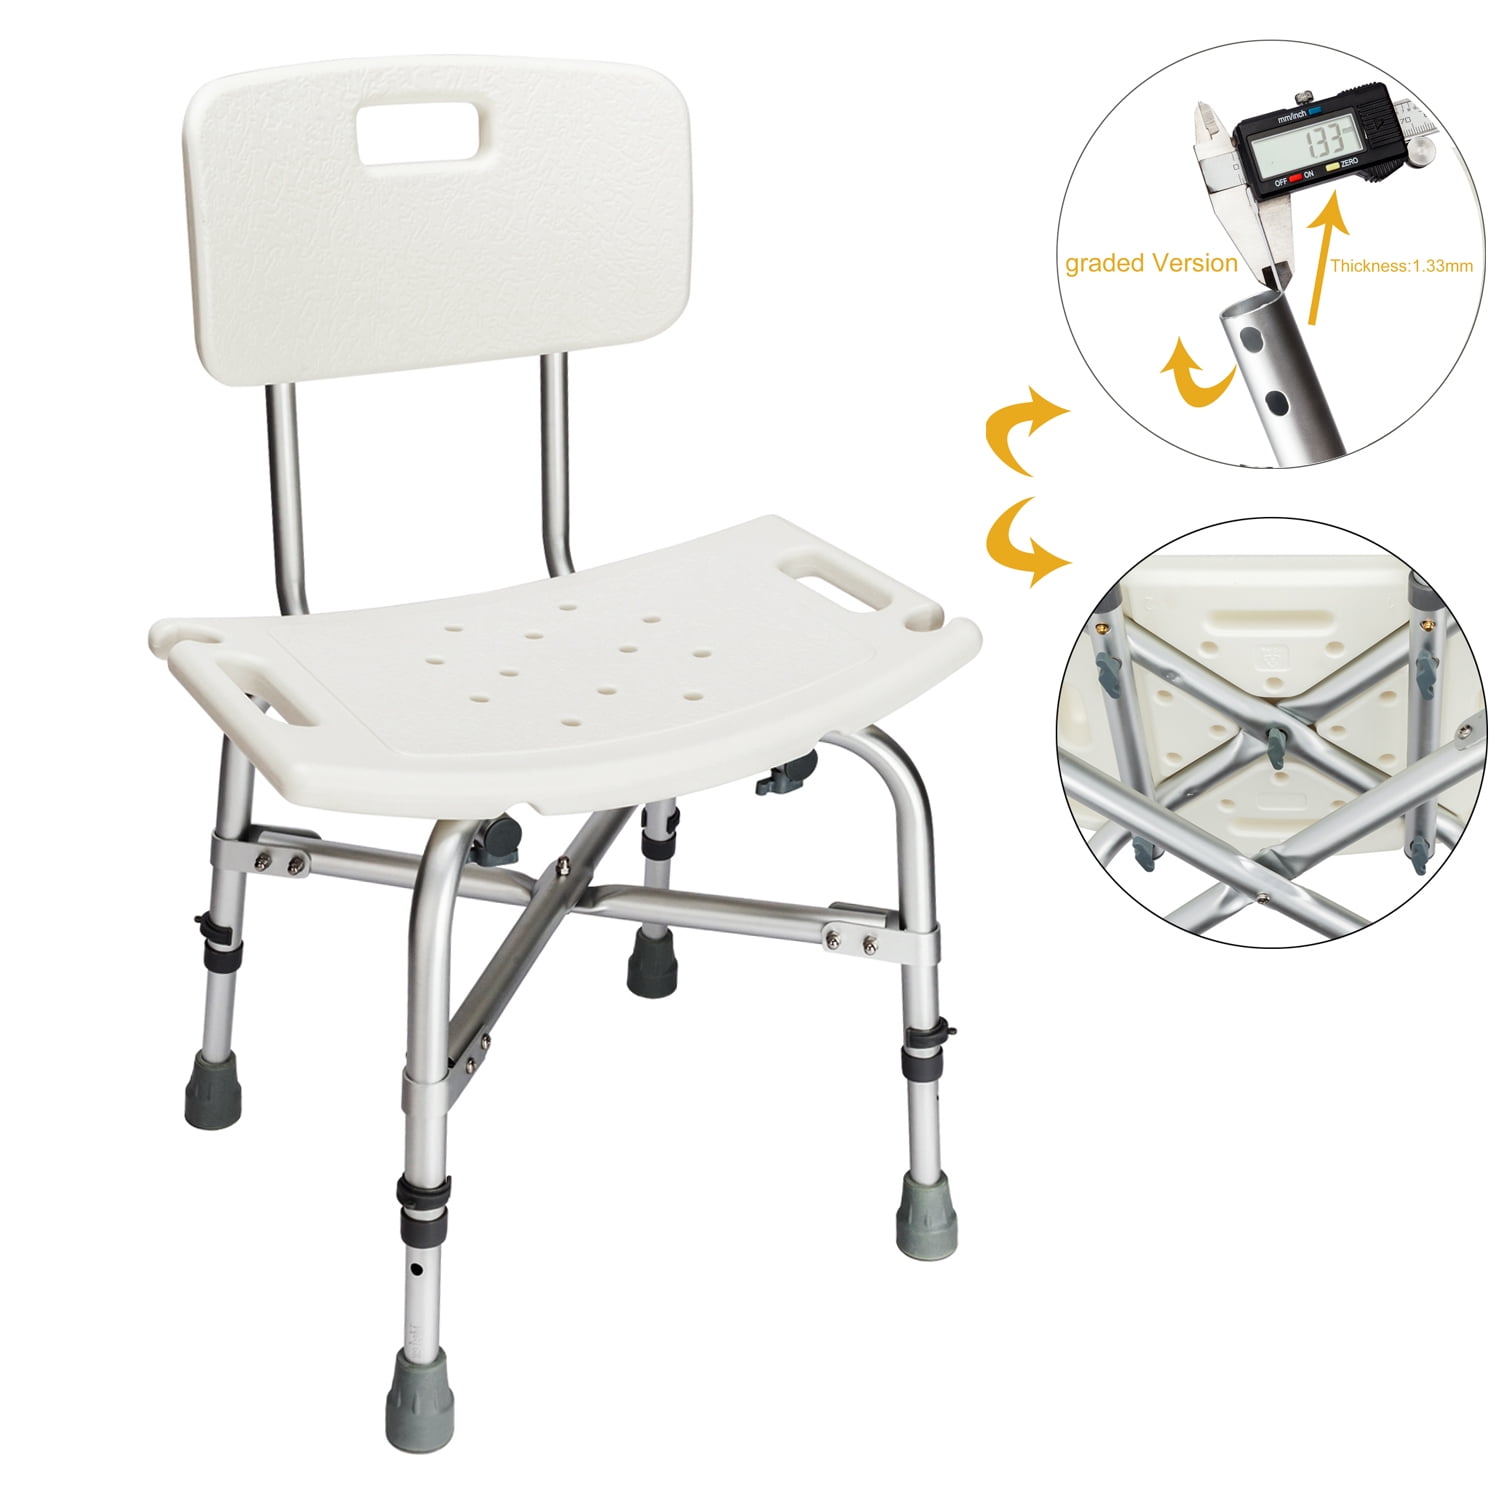 GreenChief Shower Chair with Removable Back 300lb - Heavy Duty